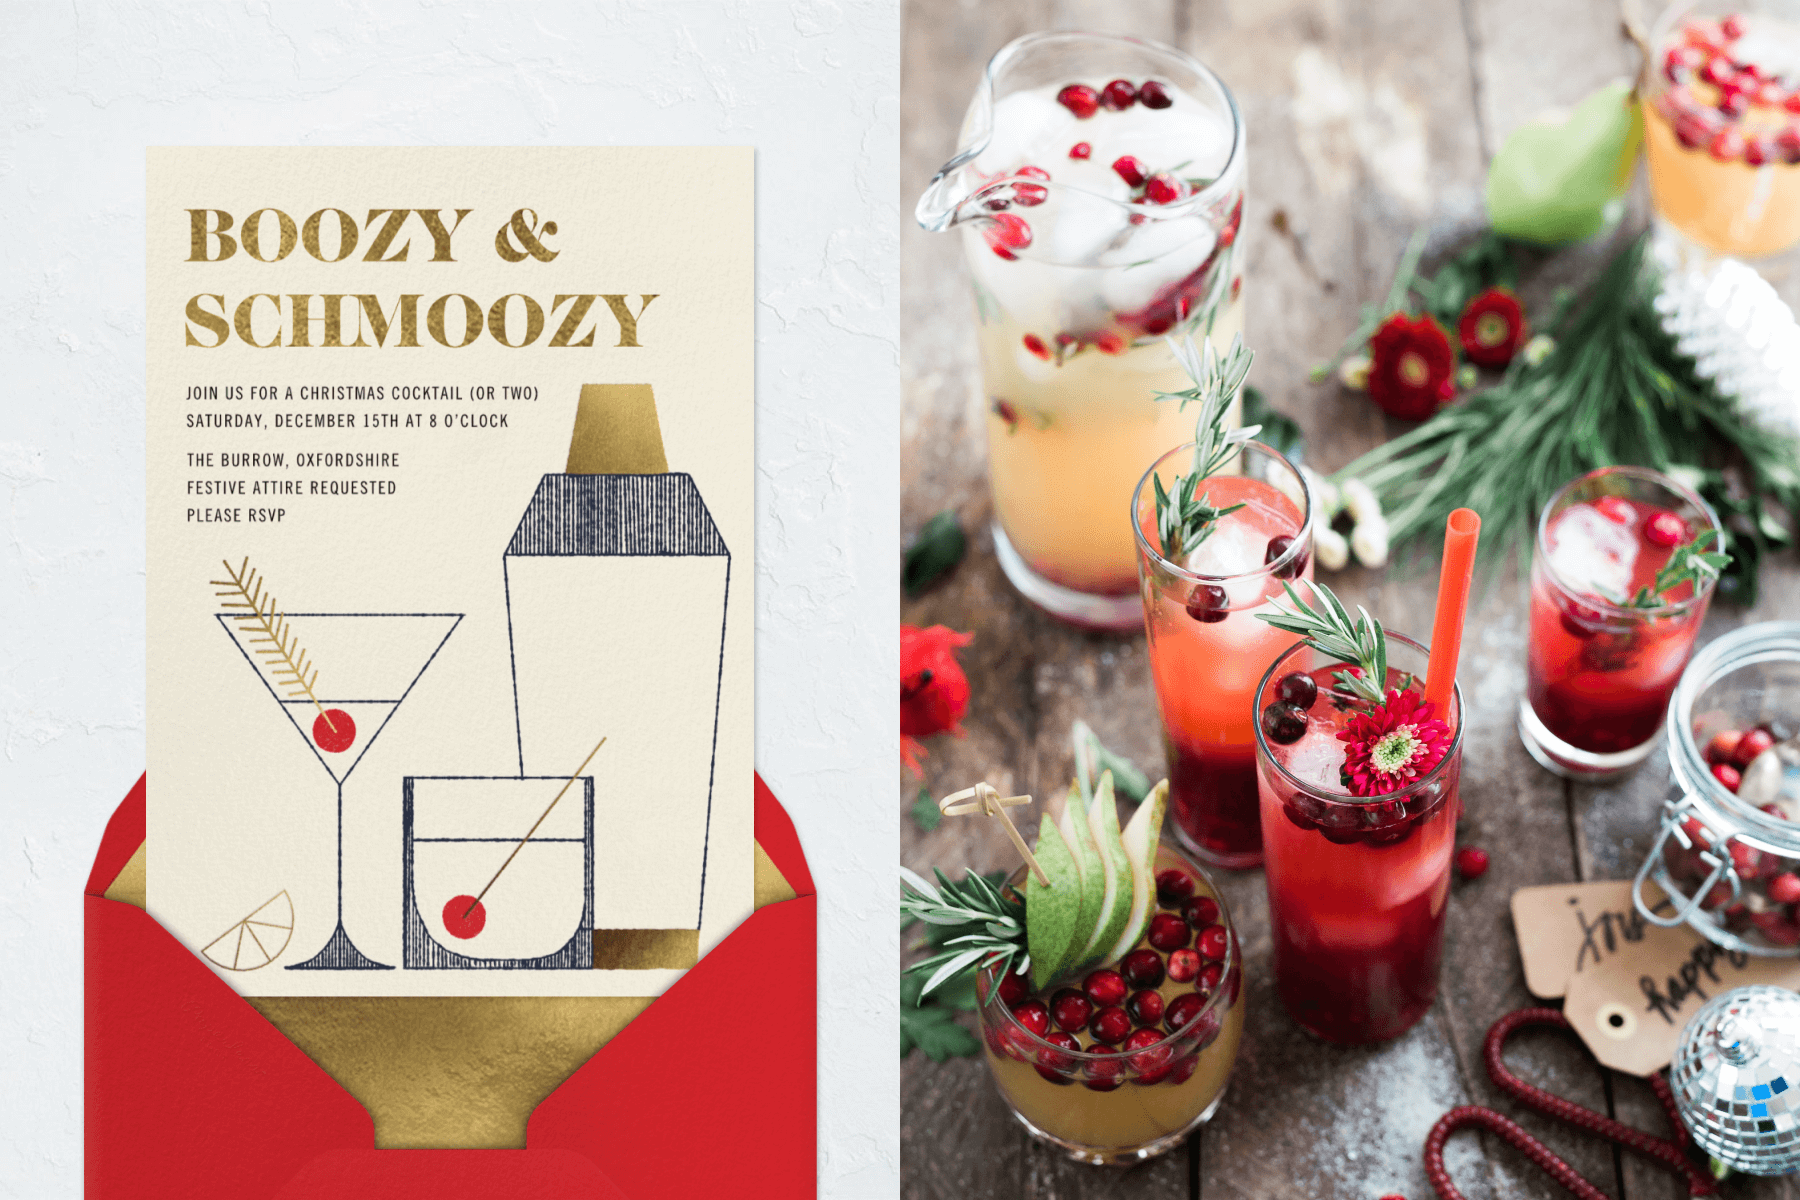 Left: A holiday invitation with a cocktail illustration; Right: A holiday cocktail scene.